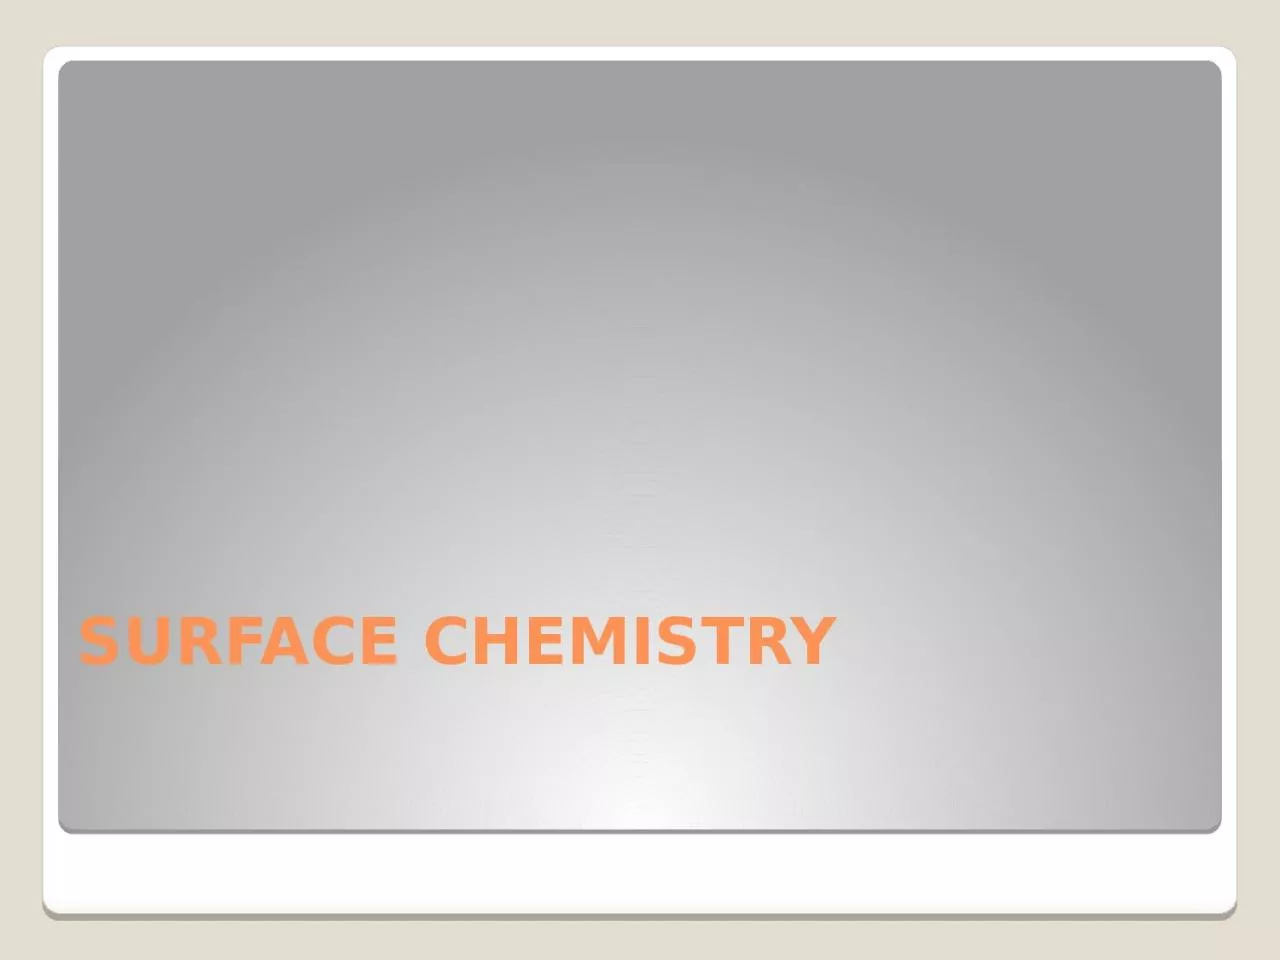 SURFACE CHEMISTRY     